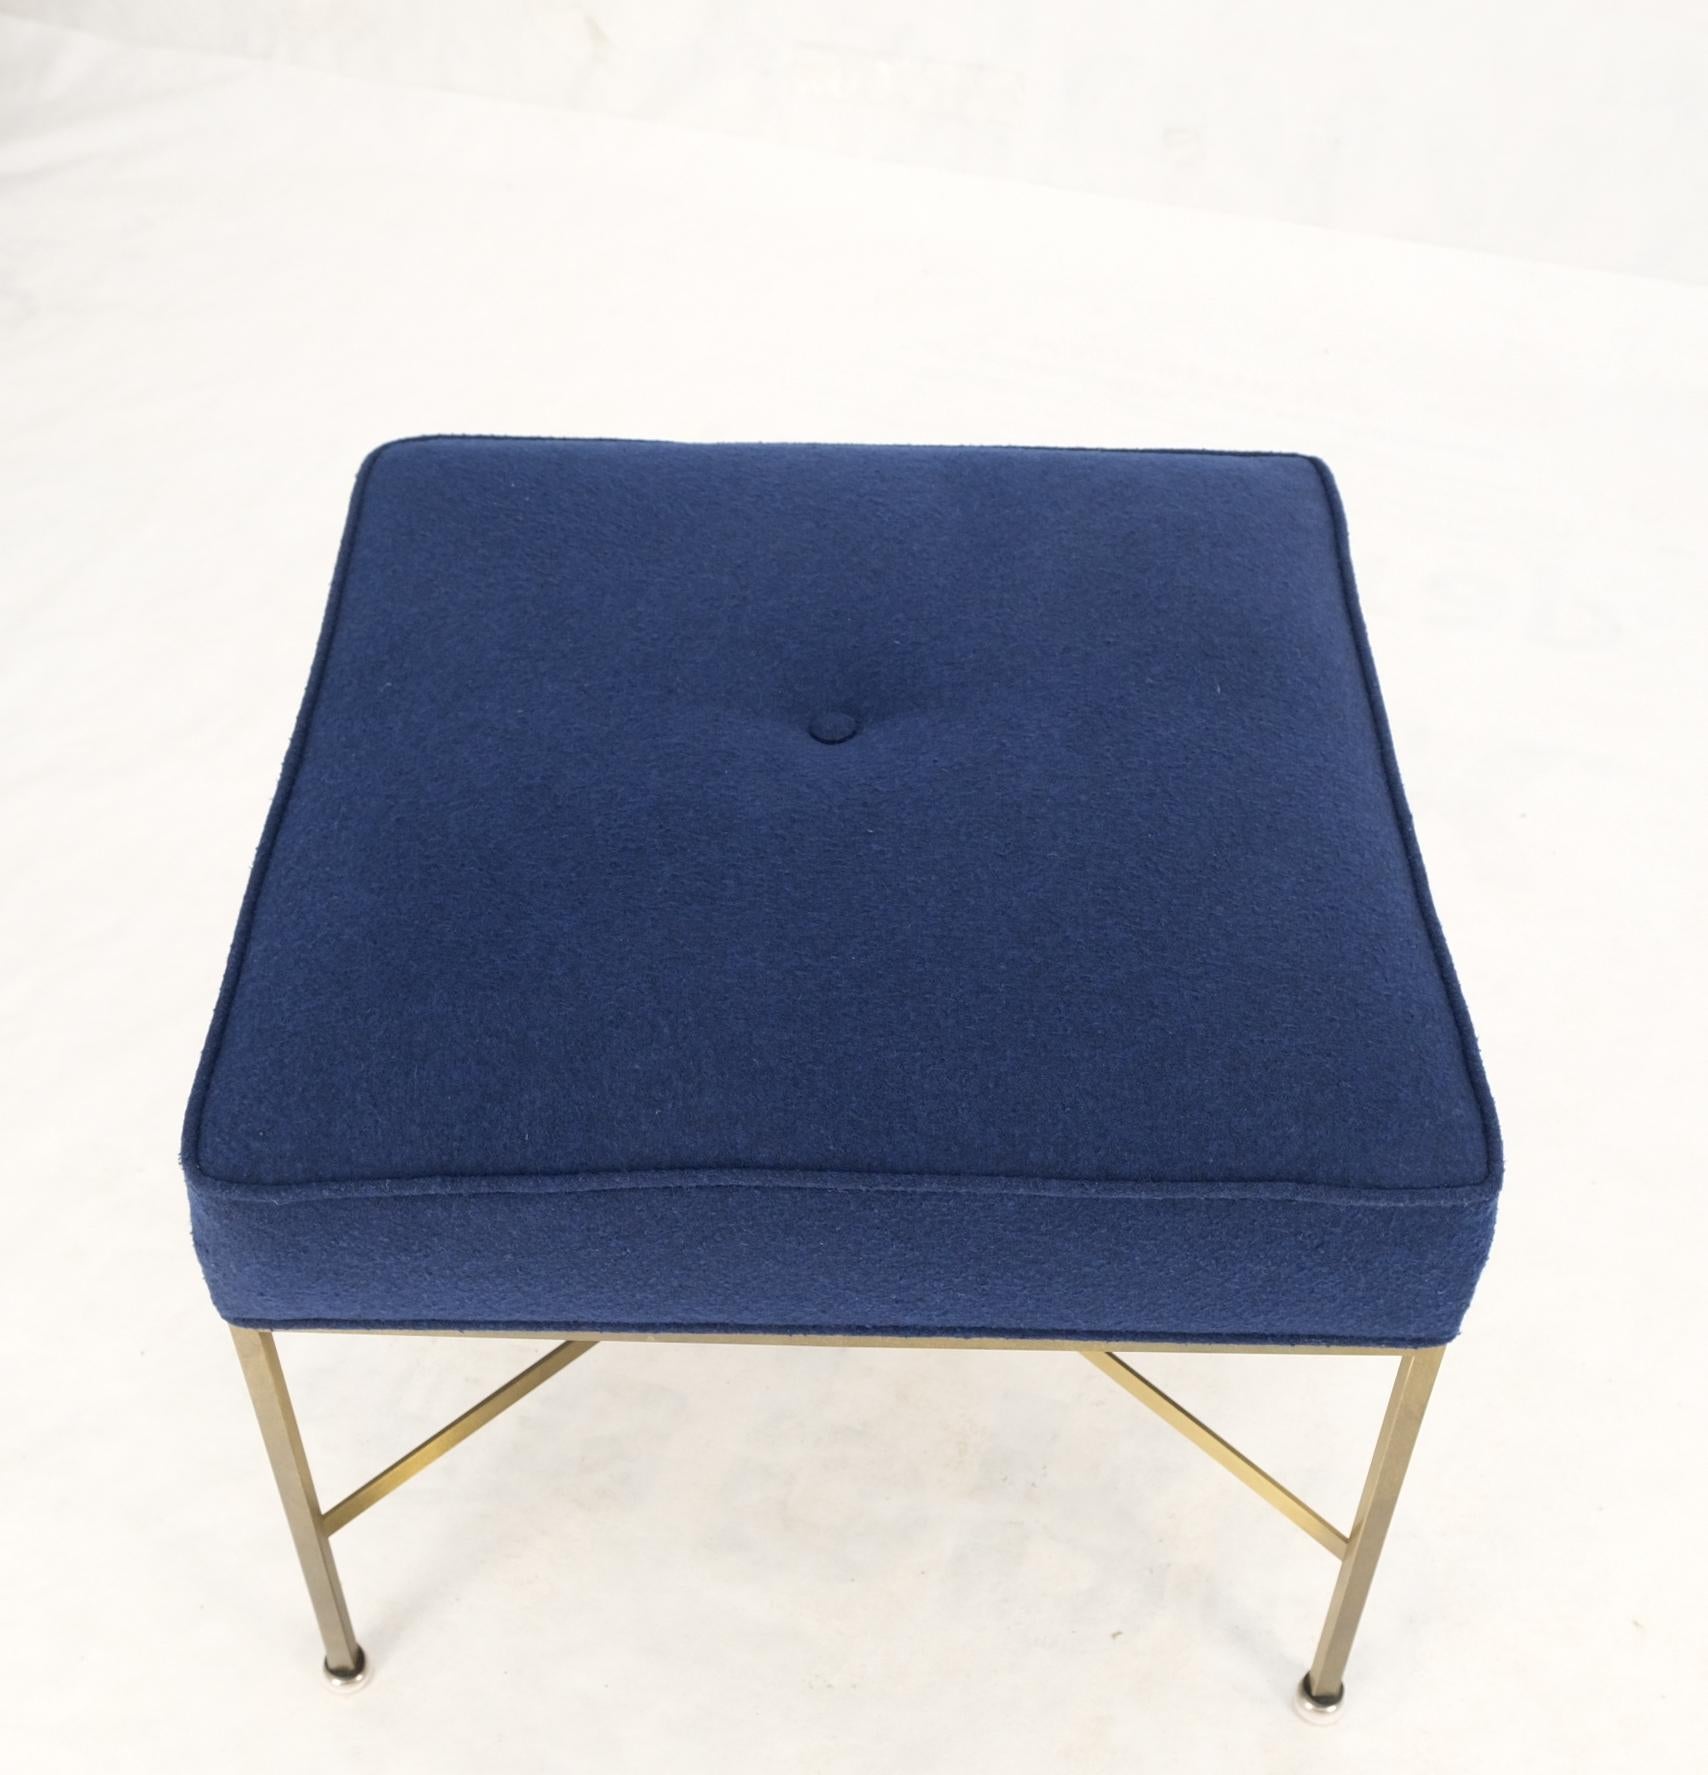 McCobb Square Brass Square Base New Navy Blue Upholstery Bench Stool For Sale 3